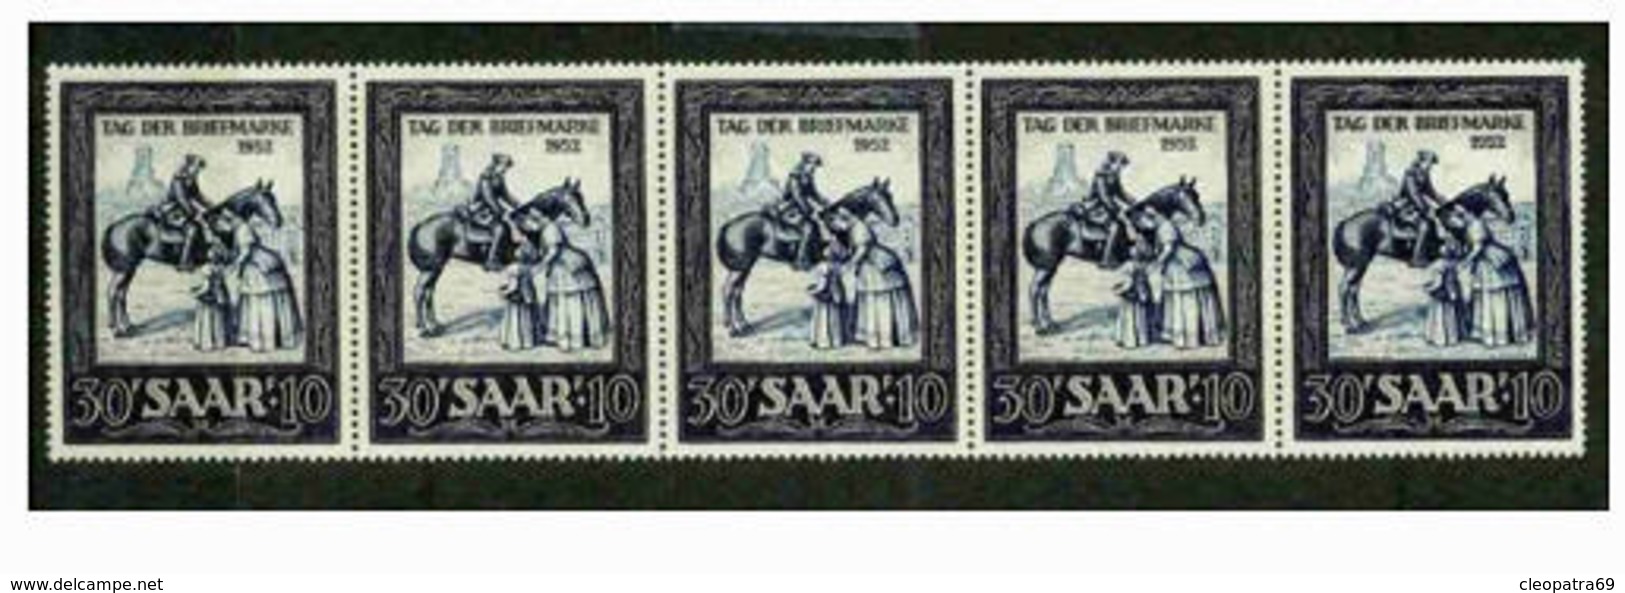 SAAR 1952 STRIP OF 5 STAMP ON STAMP STAMPDAY MNH  HORSE S11869-1 - Timbres Sur Timbres